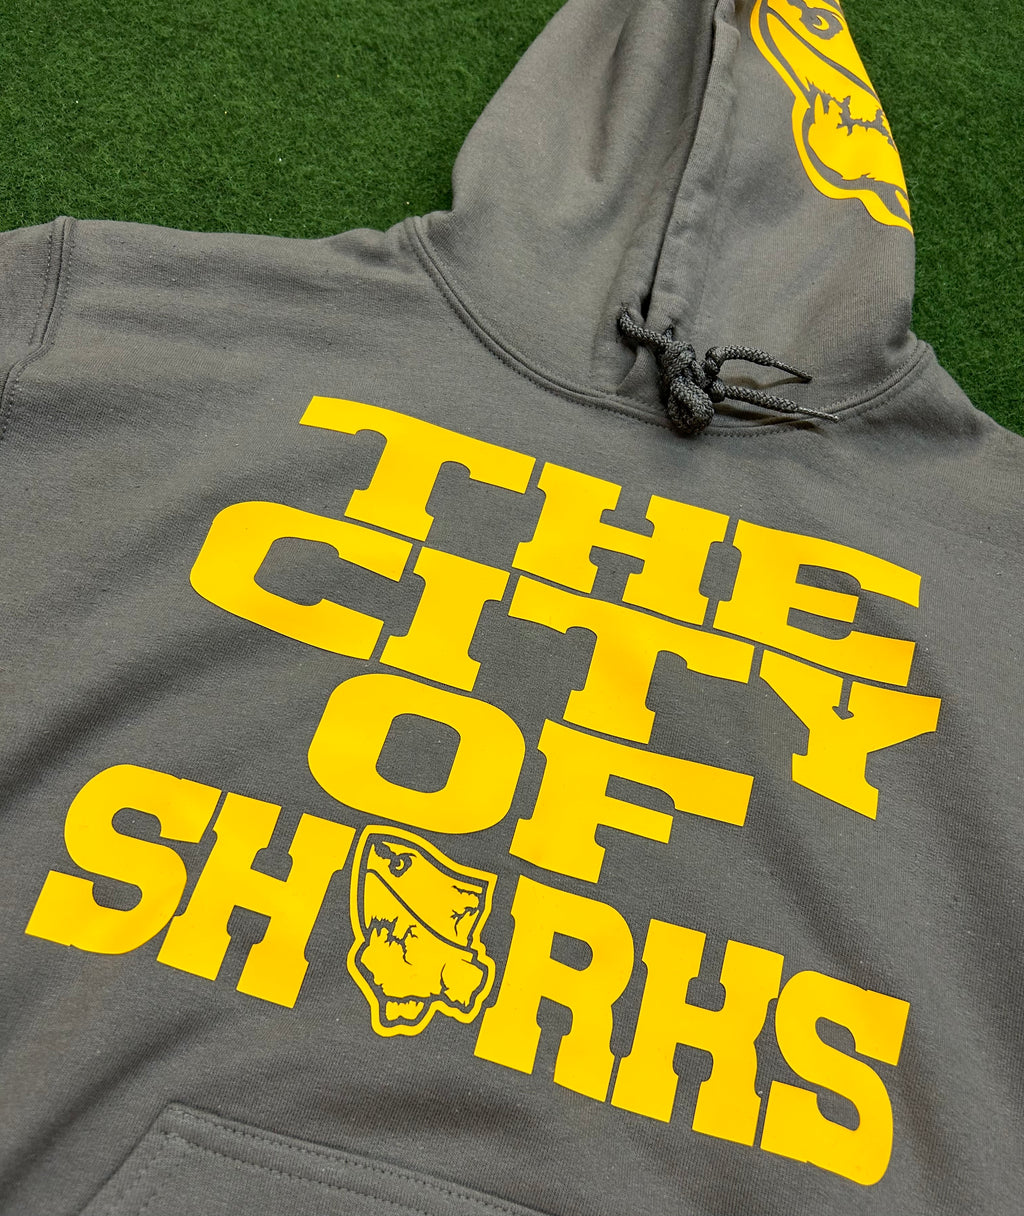 Made In Norfolk “The City of Sharks” Hoody